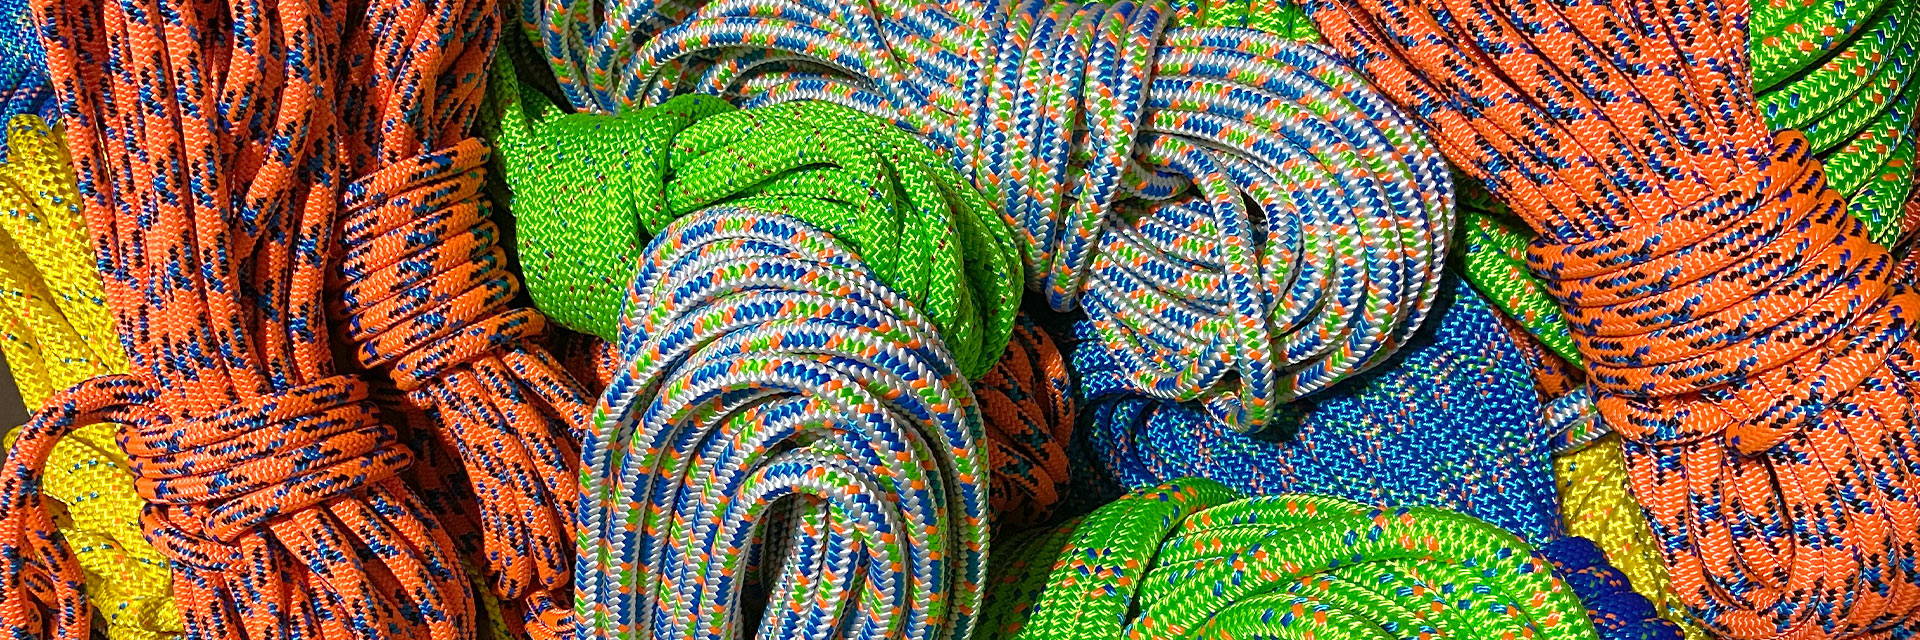 Piles of hanks of colorful Sterling ropes